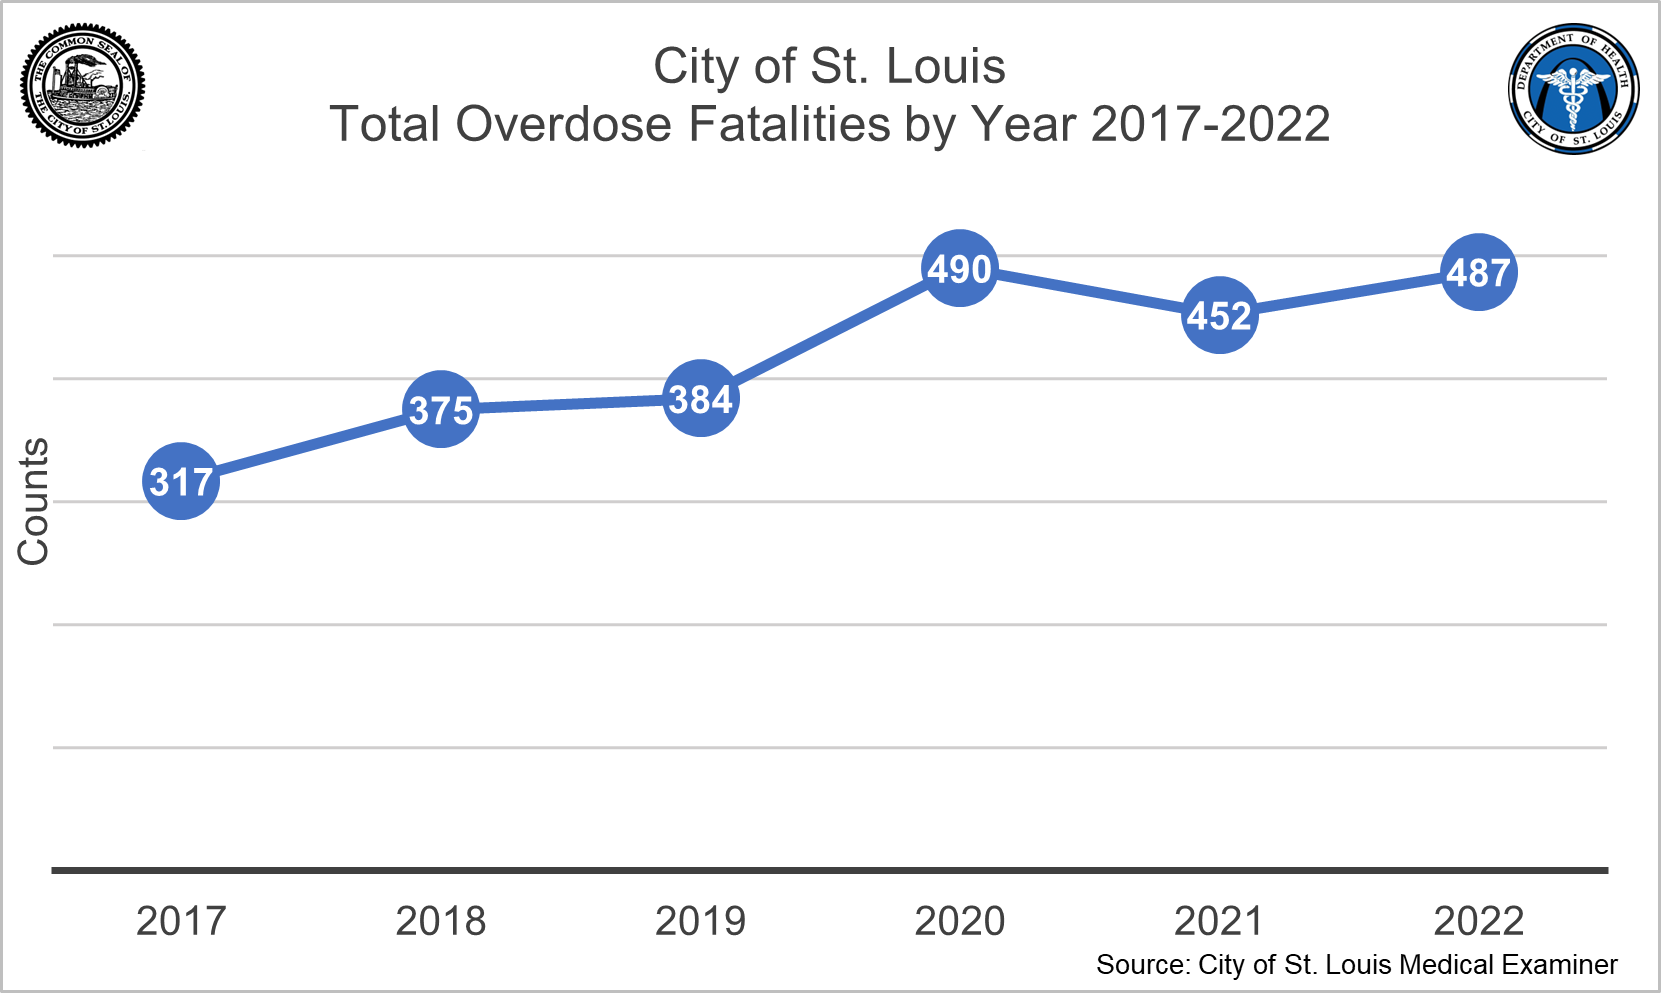 Alt text: A line graph shows the time trend of total number of overdoses in the City of St. Louis from 2017 to 2022. There is a general upward trend with a high point of 490 fatalities in 2020.